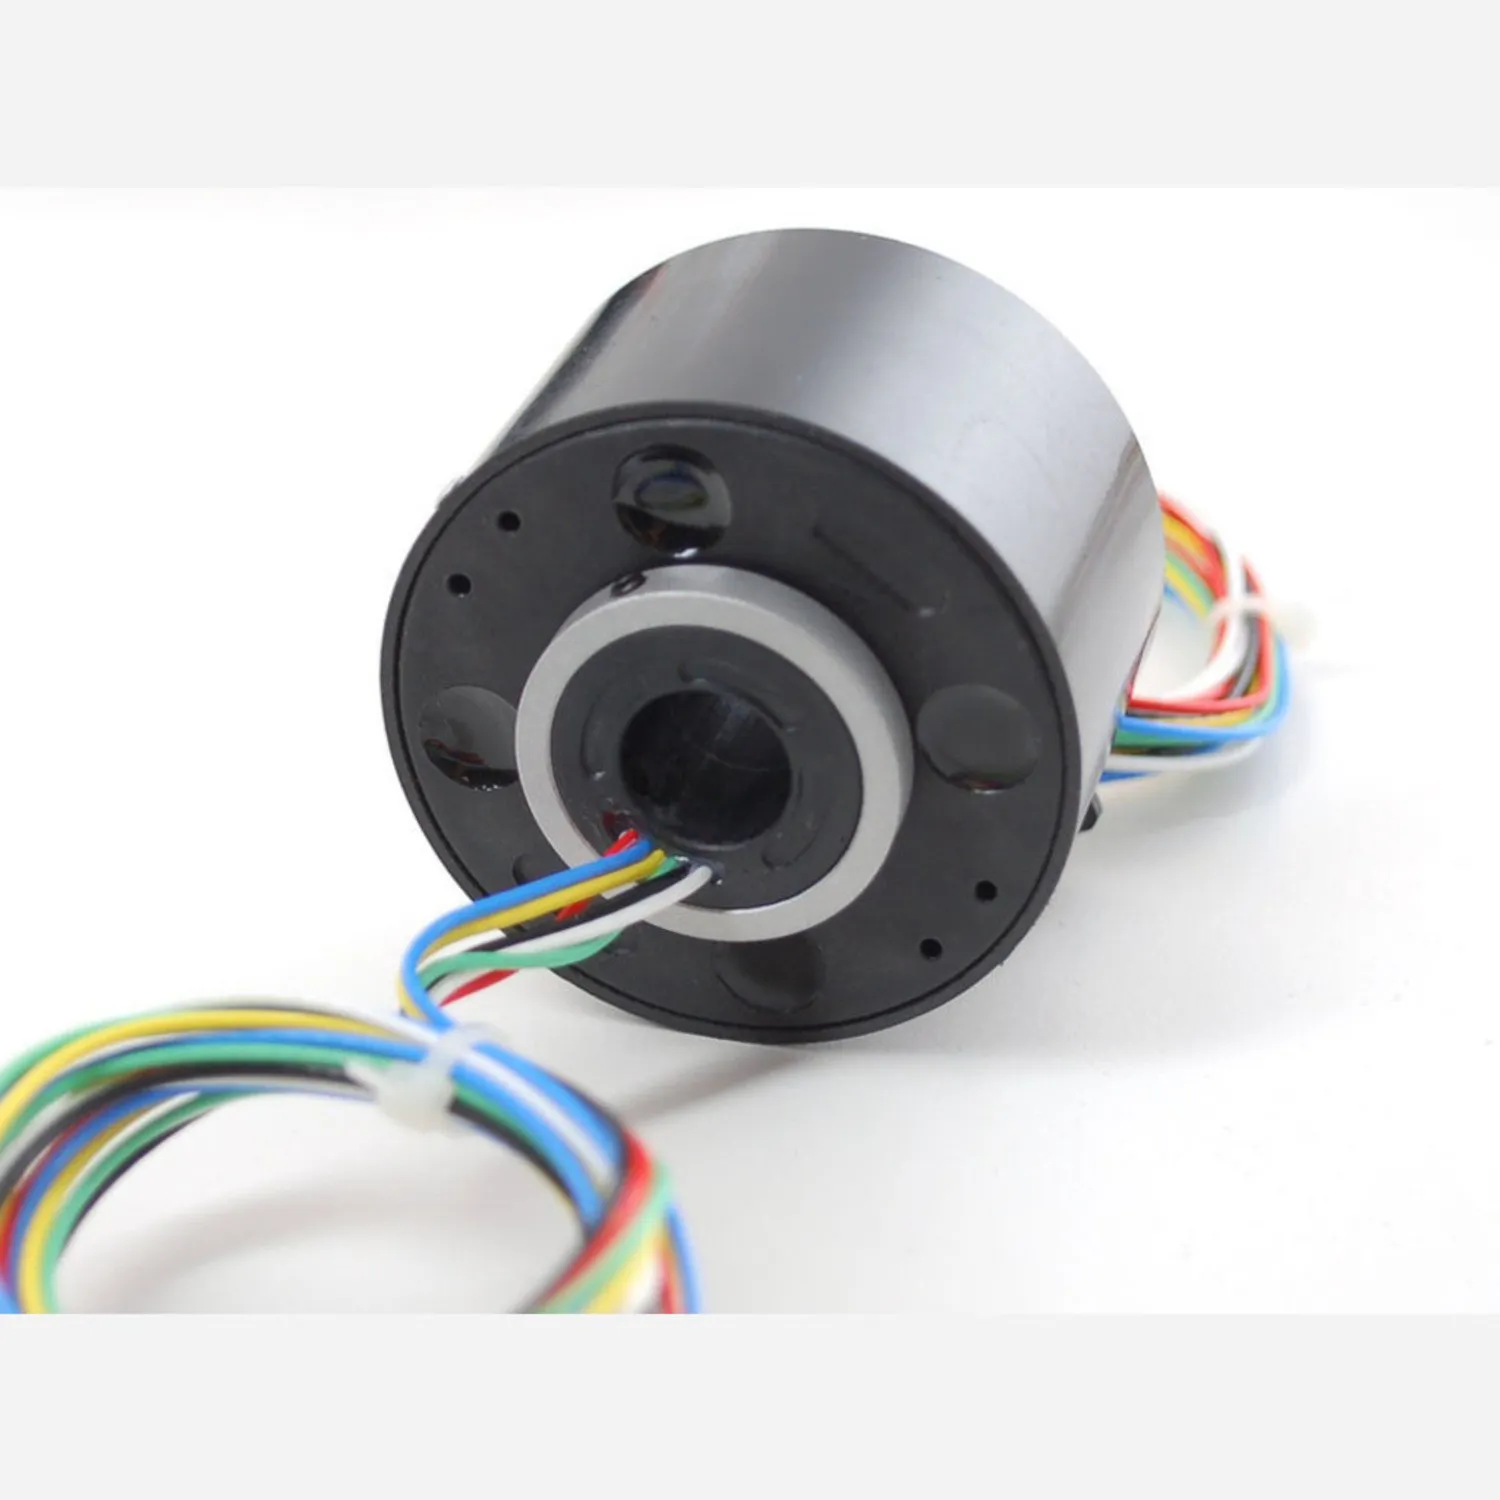 Photo of Toroid Slip Ring - 2.1 OD 1/2 ID, 6 wires, max 240V @ 5A